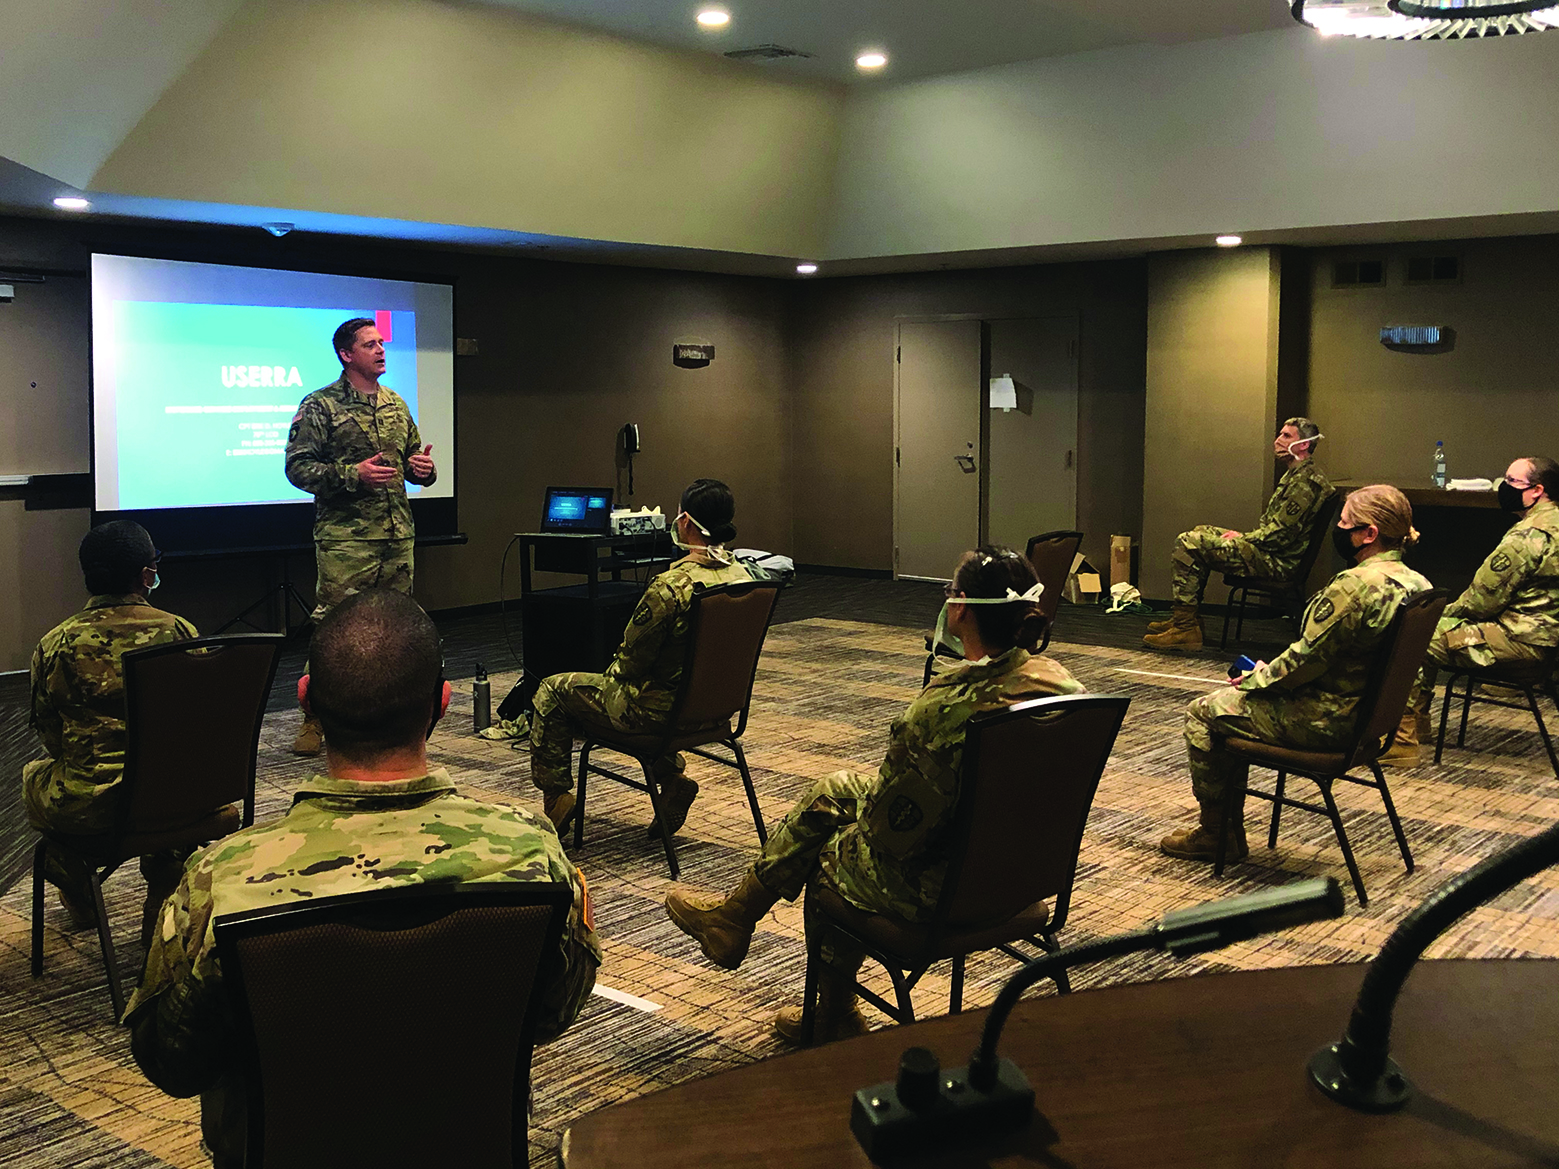 CPT Erik Hoyle, 78th LOD, Los Alamitos, California, provides a USERRA brief to the Western Medical Area Support Group (WEMARSG) unit in San Diego. This rapid response SRP was in response to COVID19. Soldiers of the WEMARSG unit practiced appropriate social distancing and ensured proper wear of PPE.